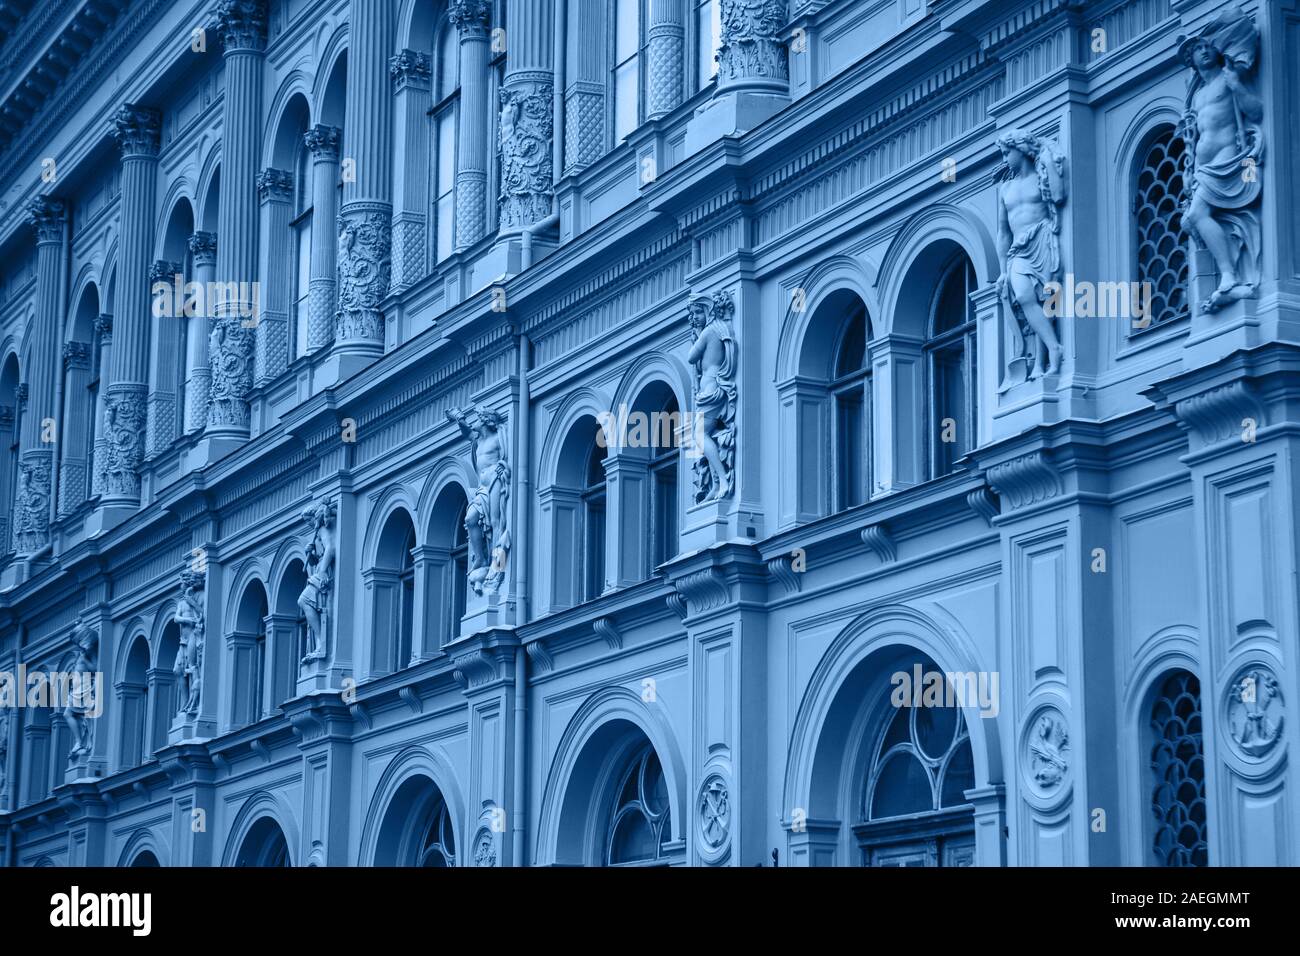 An old building with many windows in a row in a trendy classic blue style. Stock Photo